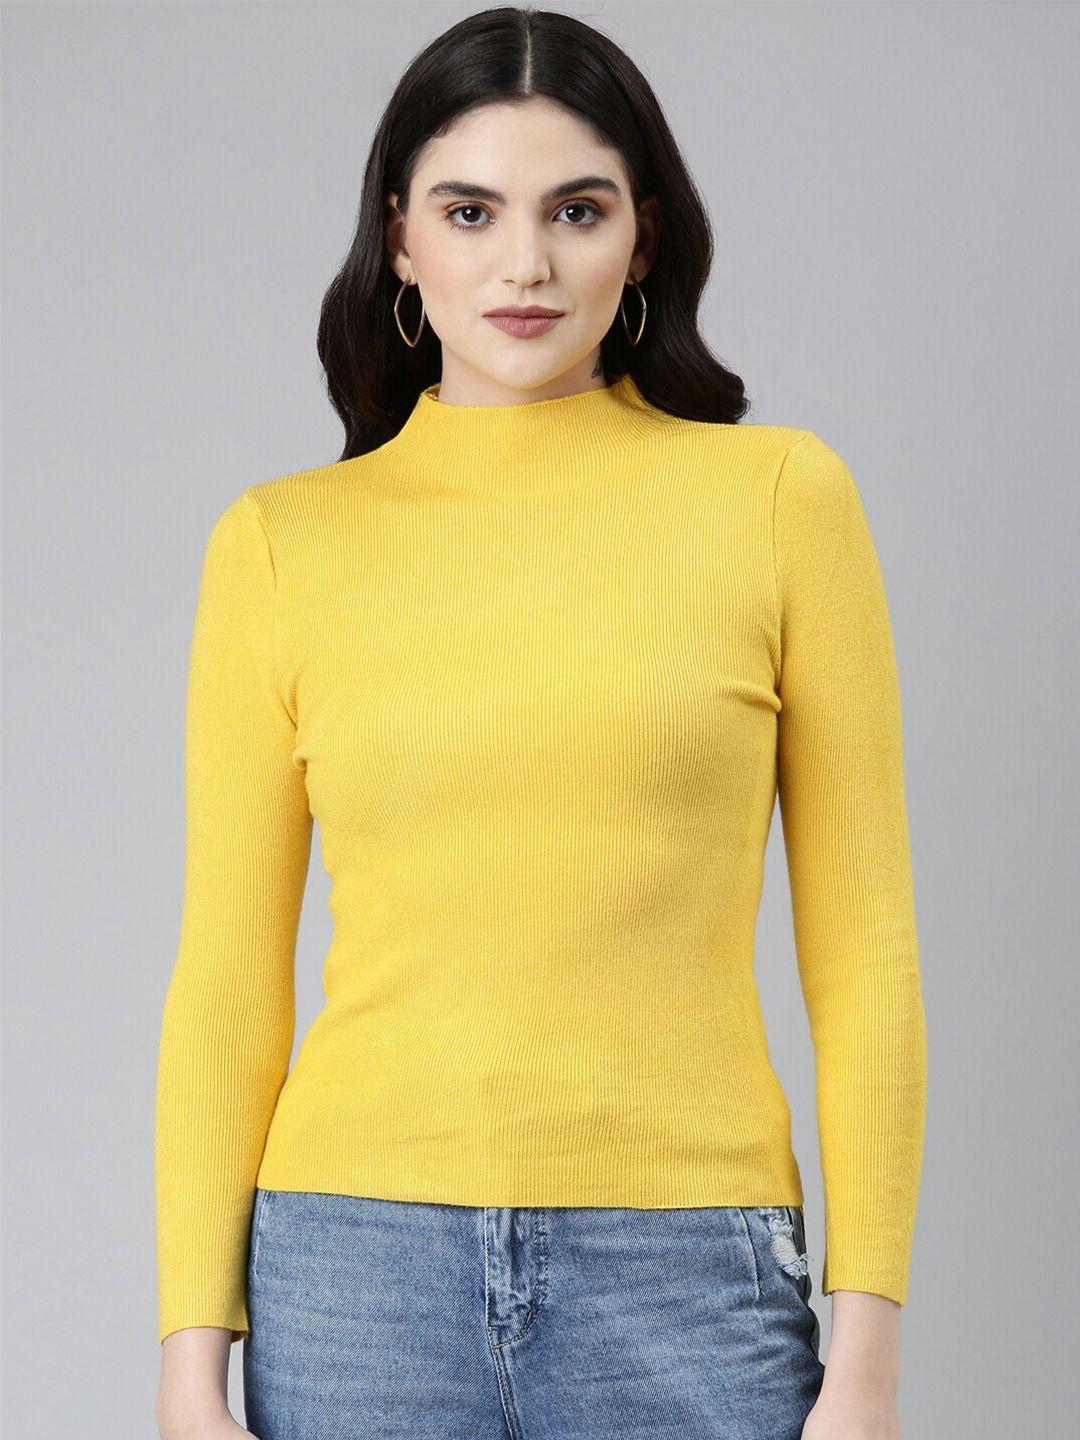 showoff high neck long sleeves fitted top